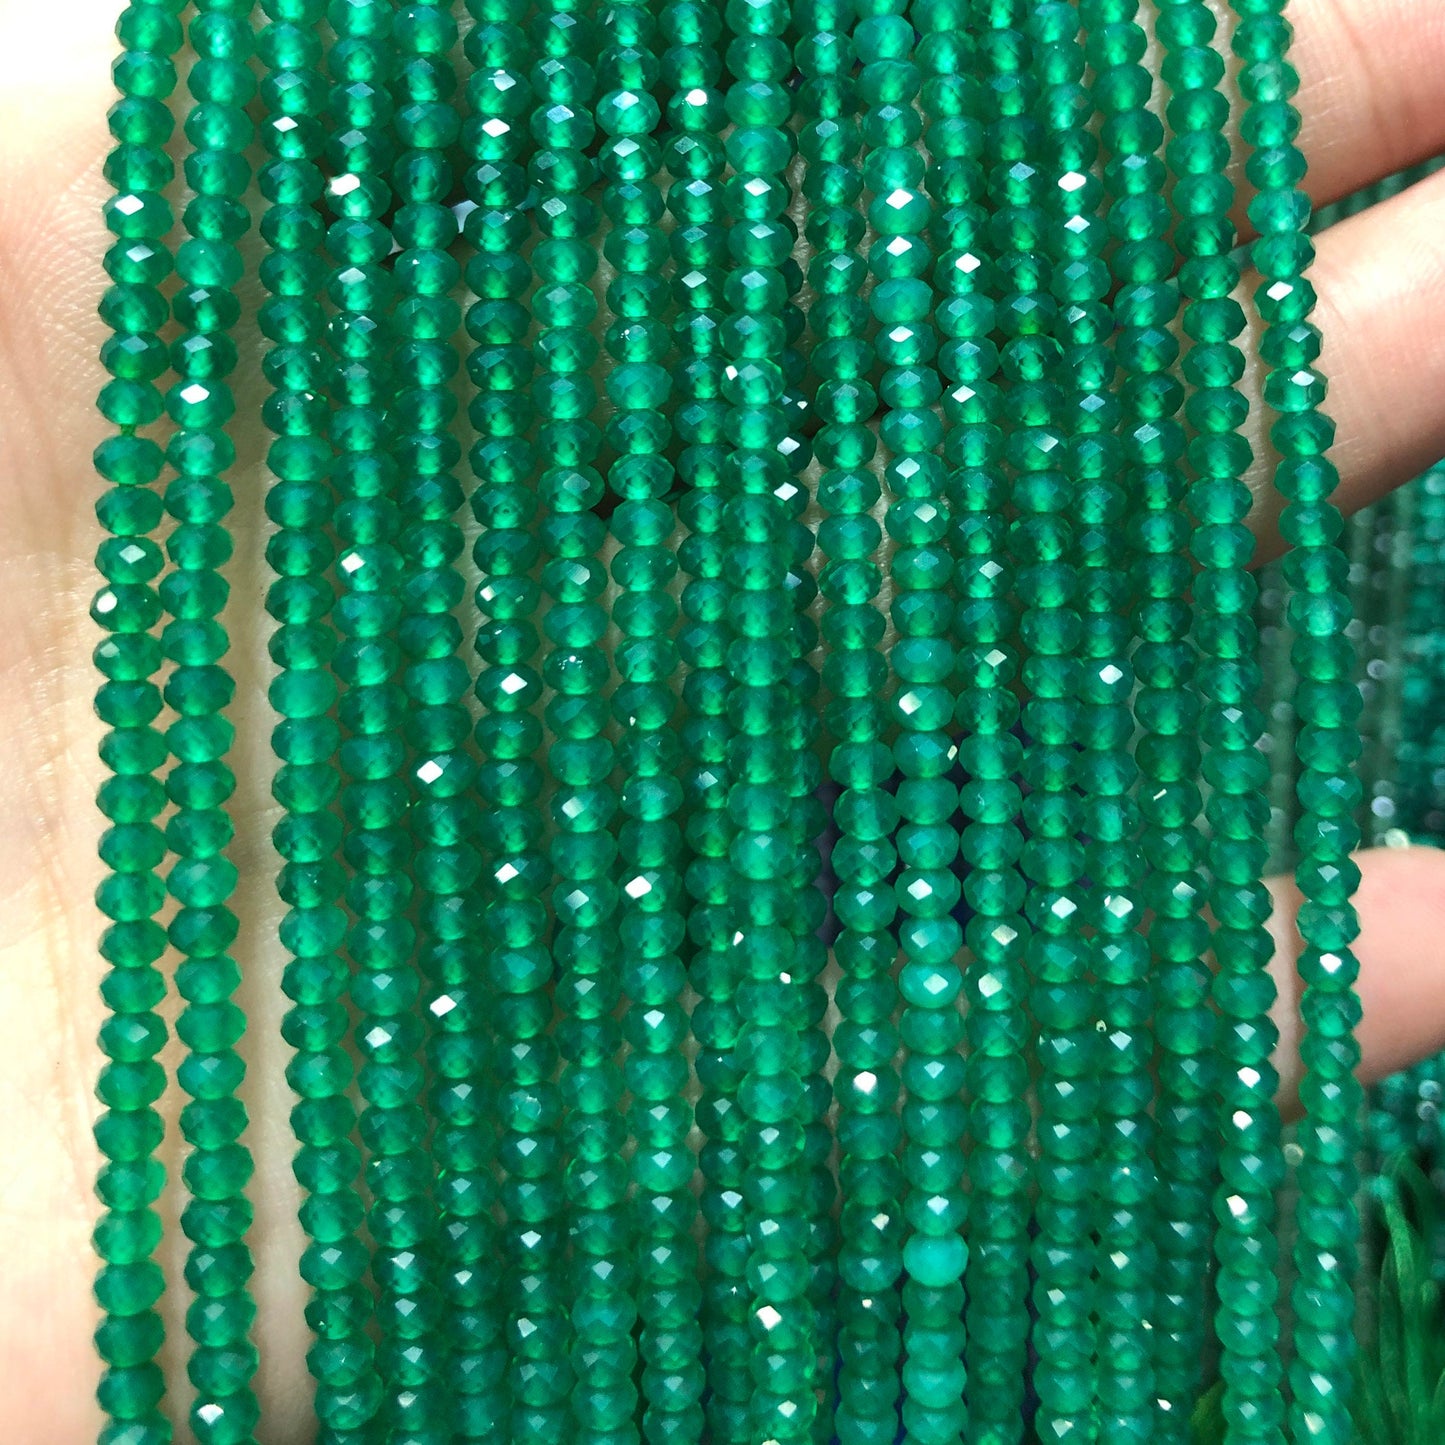 Green Agate Nice Cut Rondelle Faceted Beads 2x3mm 4x6mm 15''